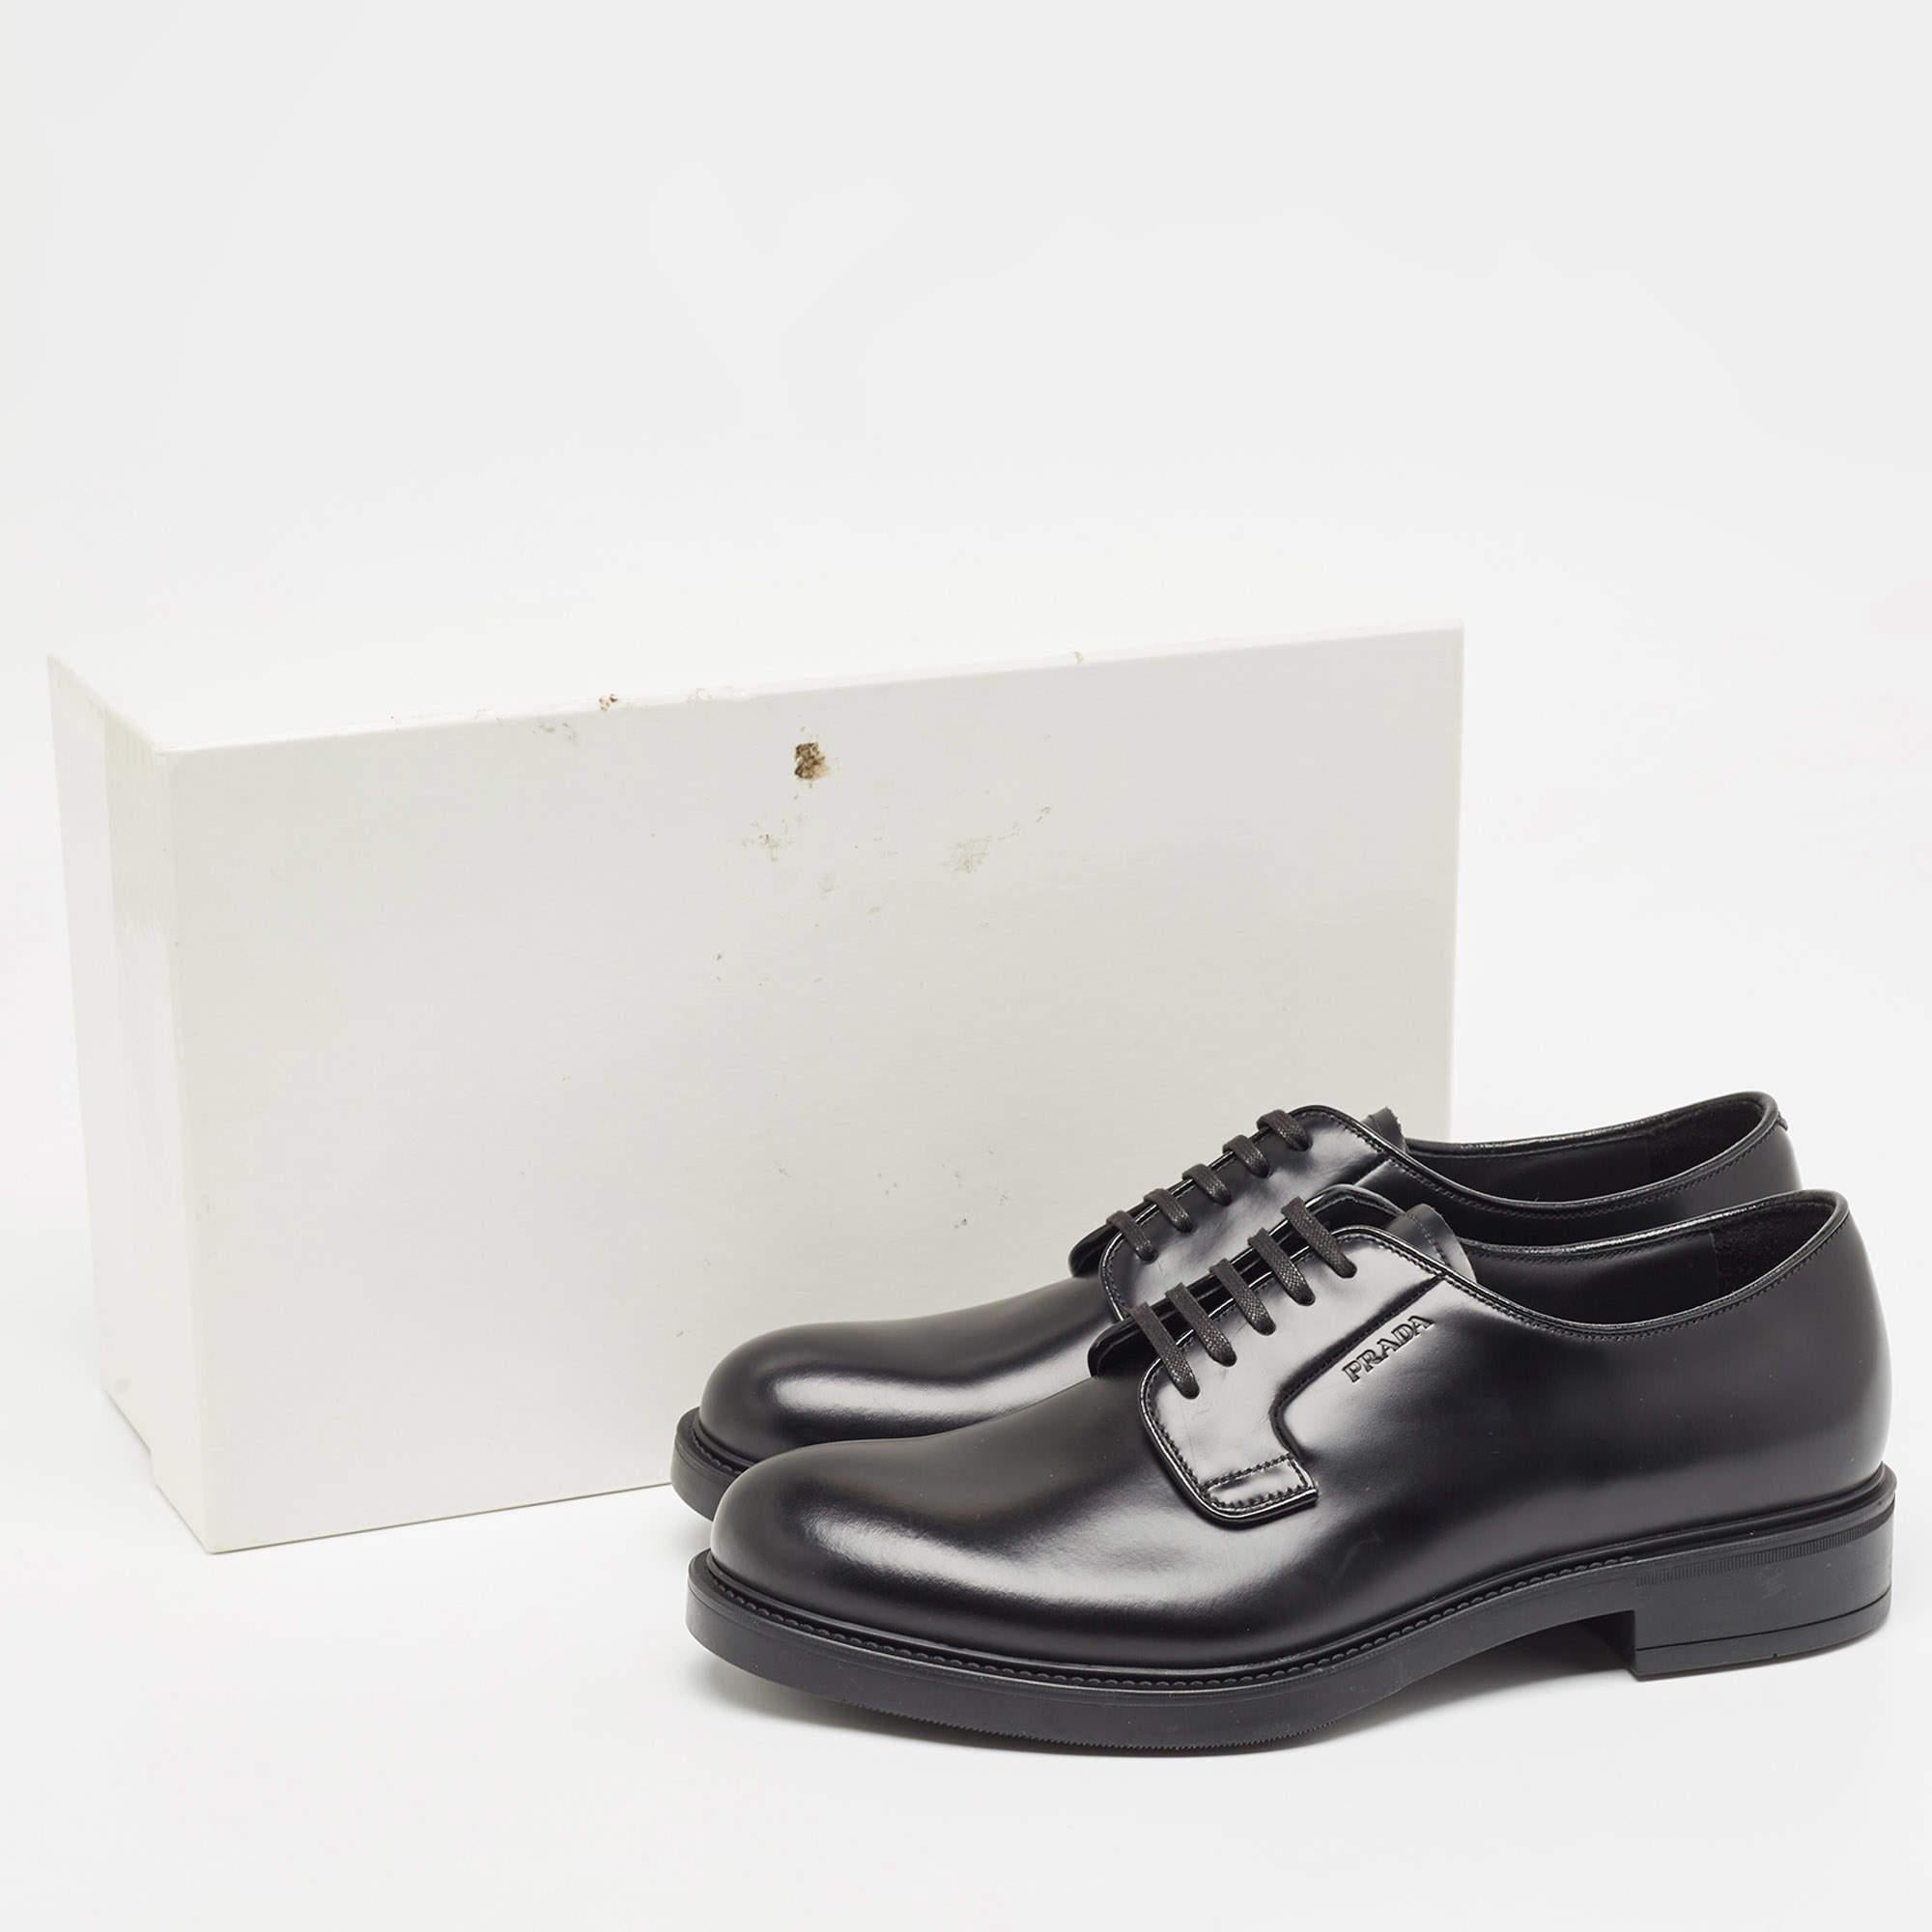 Prada Black Leather Lace Up Oxfords Size 40 For Sale 5